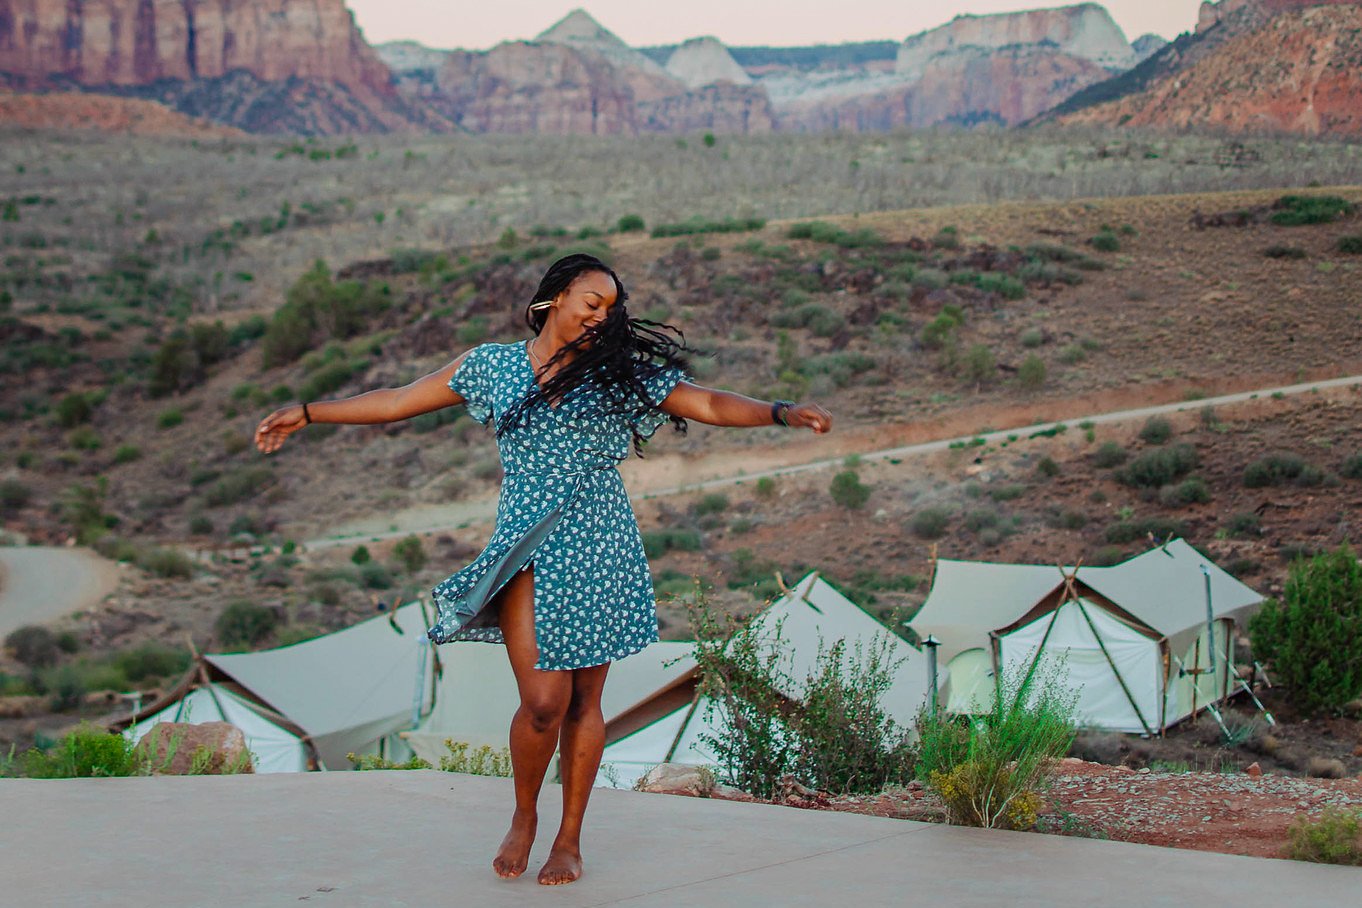 Woman dancing in Zion with TrovaTrip.